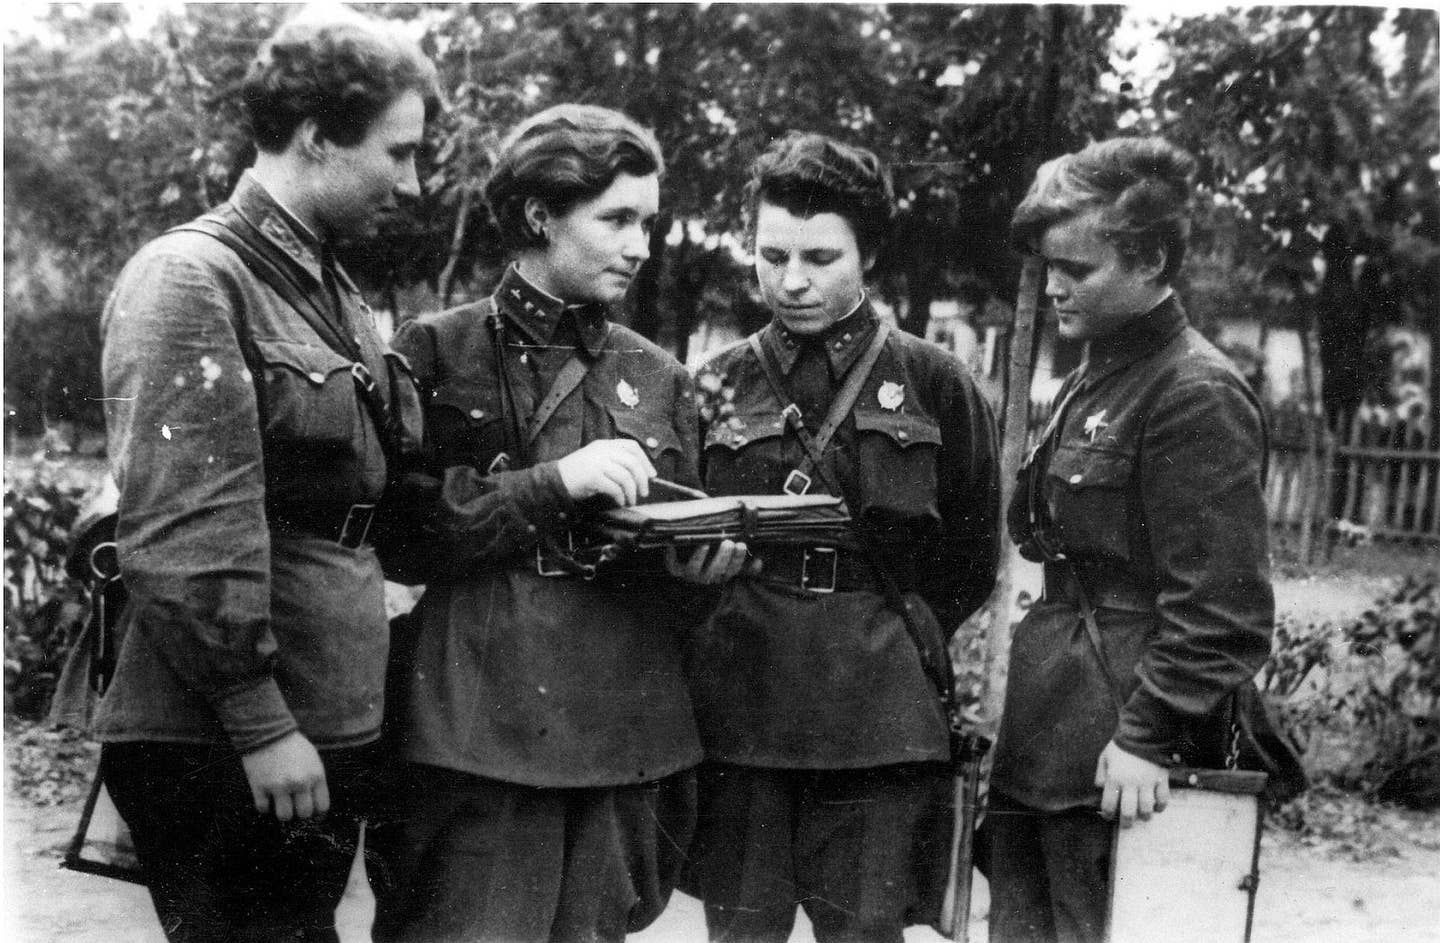 The "Night Witches" planning a mission (Sergey G on Flickr)